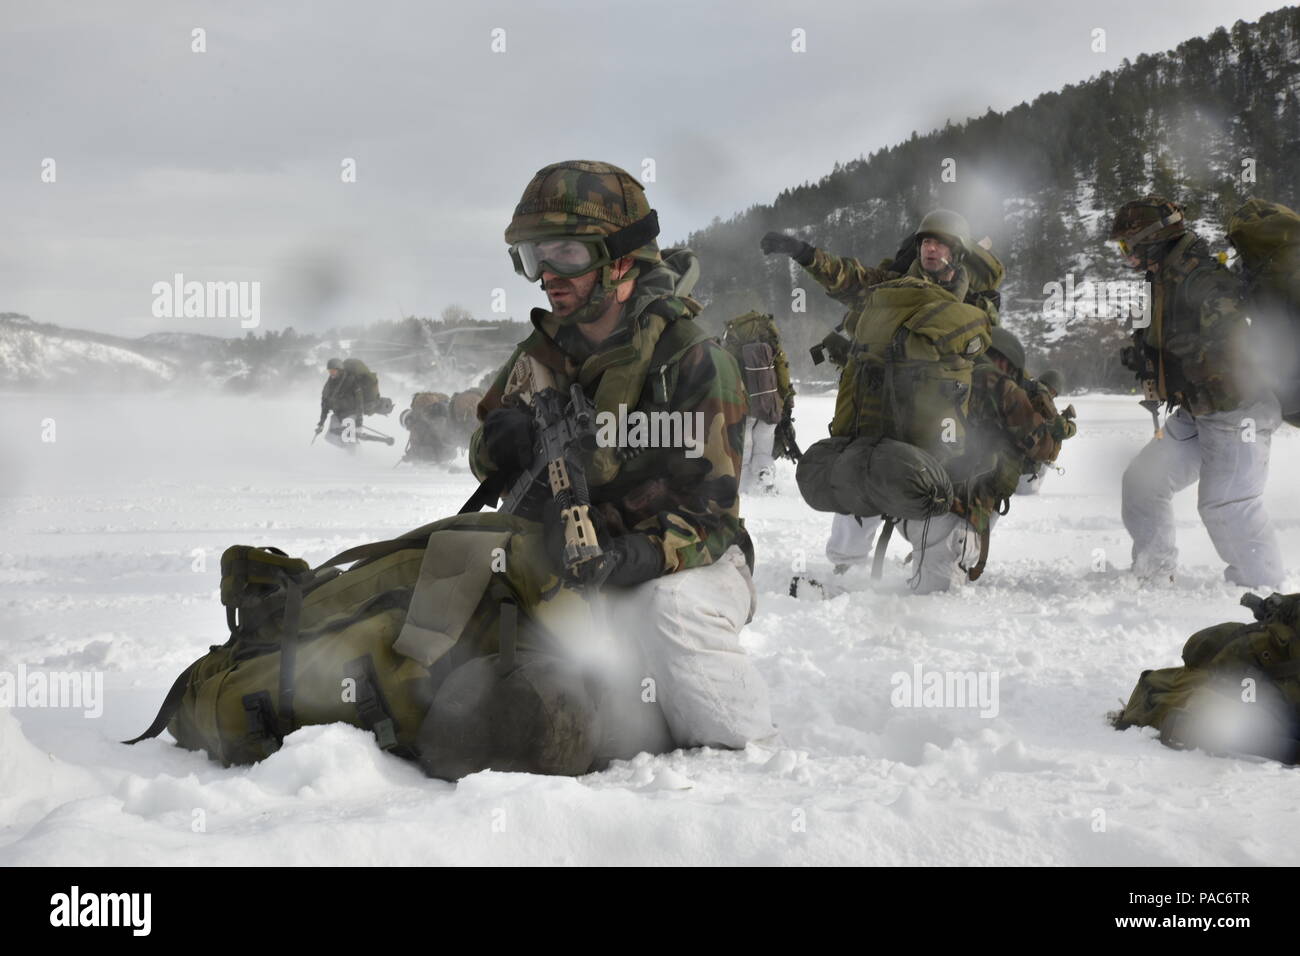 Soldiers from the Royal Netherlands Army participating in Exercise Cold Response 16 position themselves after exiting aircraft during the first phase of the extreme cold weather training. Cold Response is a Norwegian-led exercise that rehearses high-intensity operations in challenging winter conditions. The exercise involves more than 3,000 U.S. service members; approximately 6,500 members of the Norwegian Armed Forces; and nearly 4,000 troops from 11 allied and partner nations including Belgium, Canada, Denmark, France, Germany, Latvia, the Netherlands, Poland, Spain, Sweden, the United Kingd Stock Photo